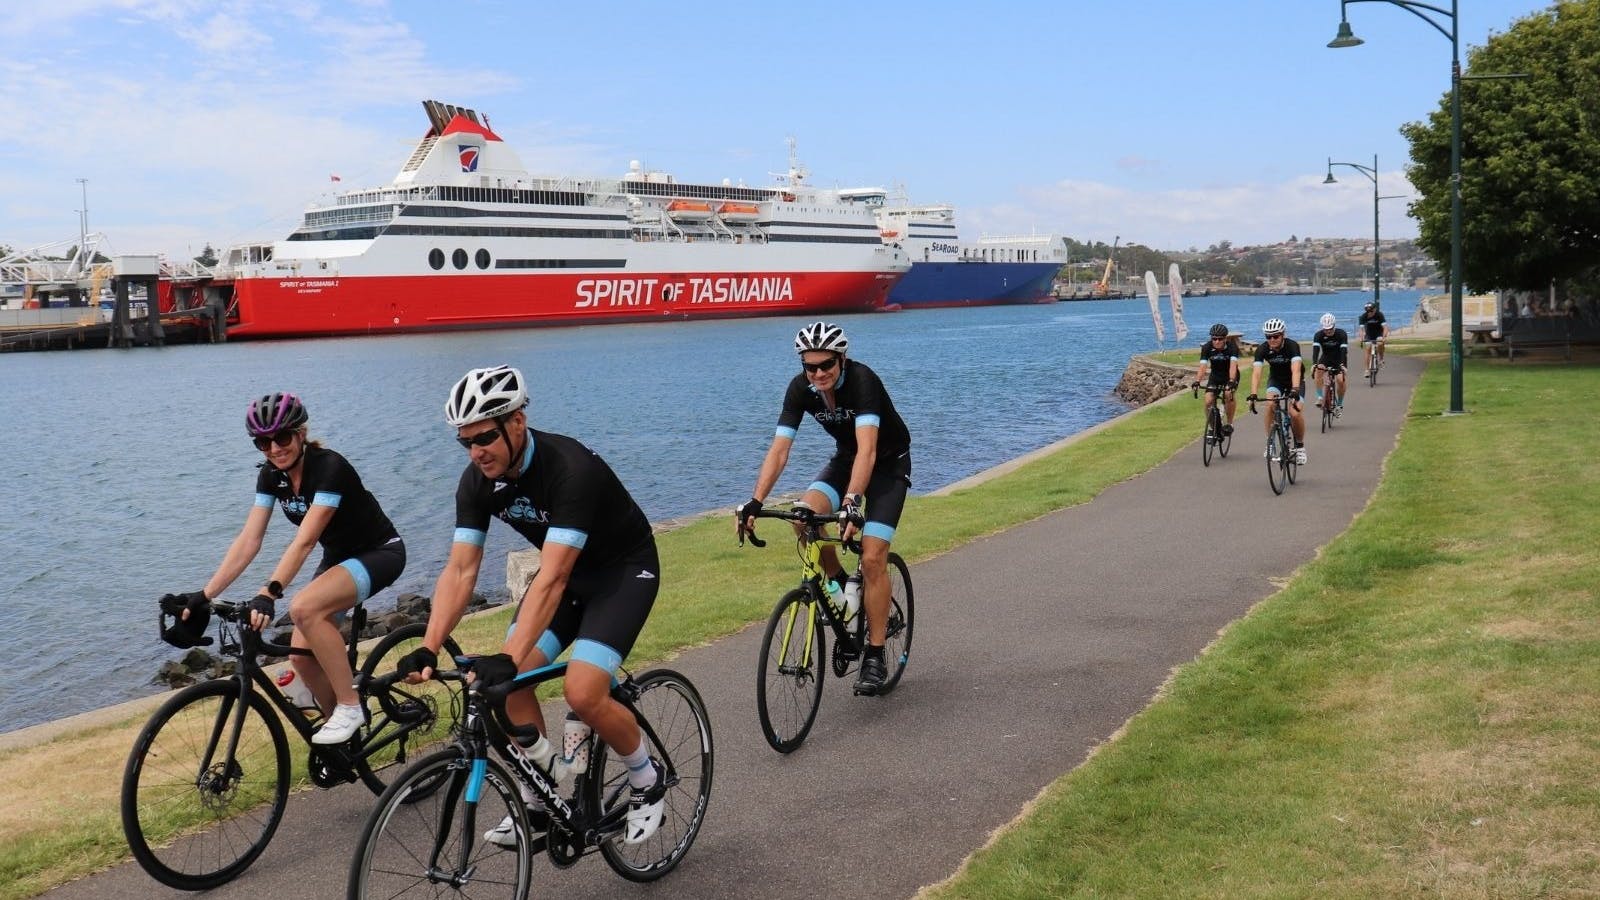 Riding back to the hotel after lunch on the waterfront in Devonport Tasmania